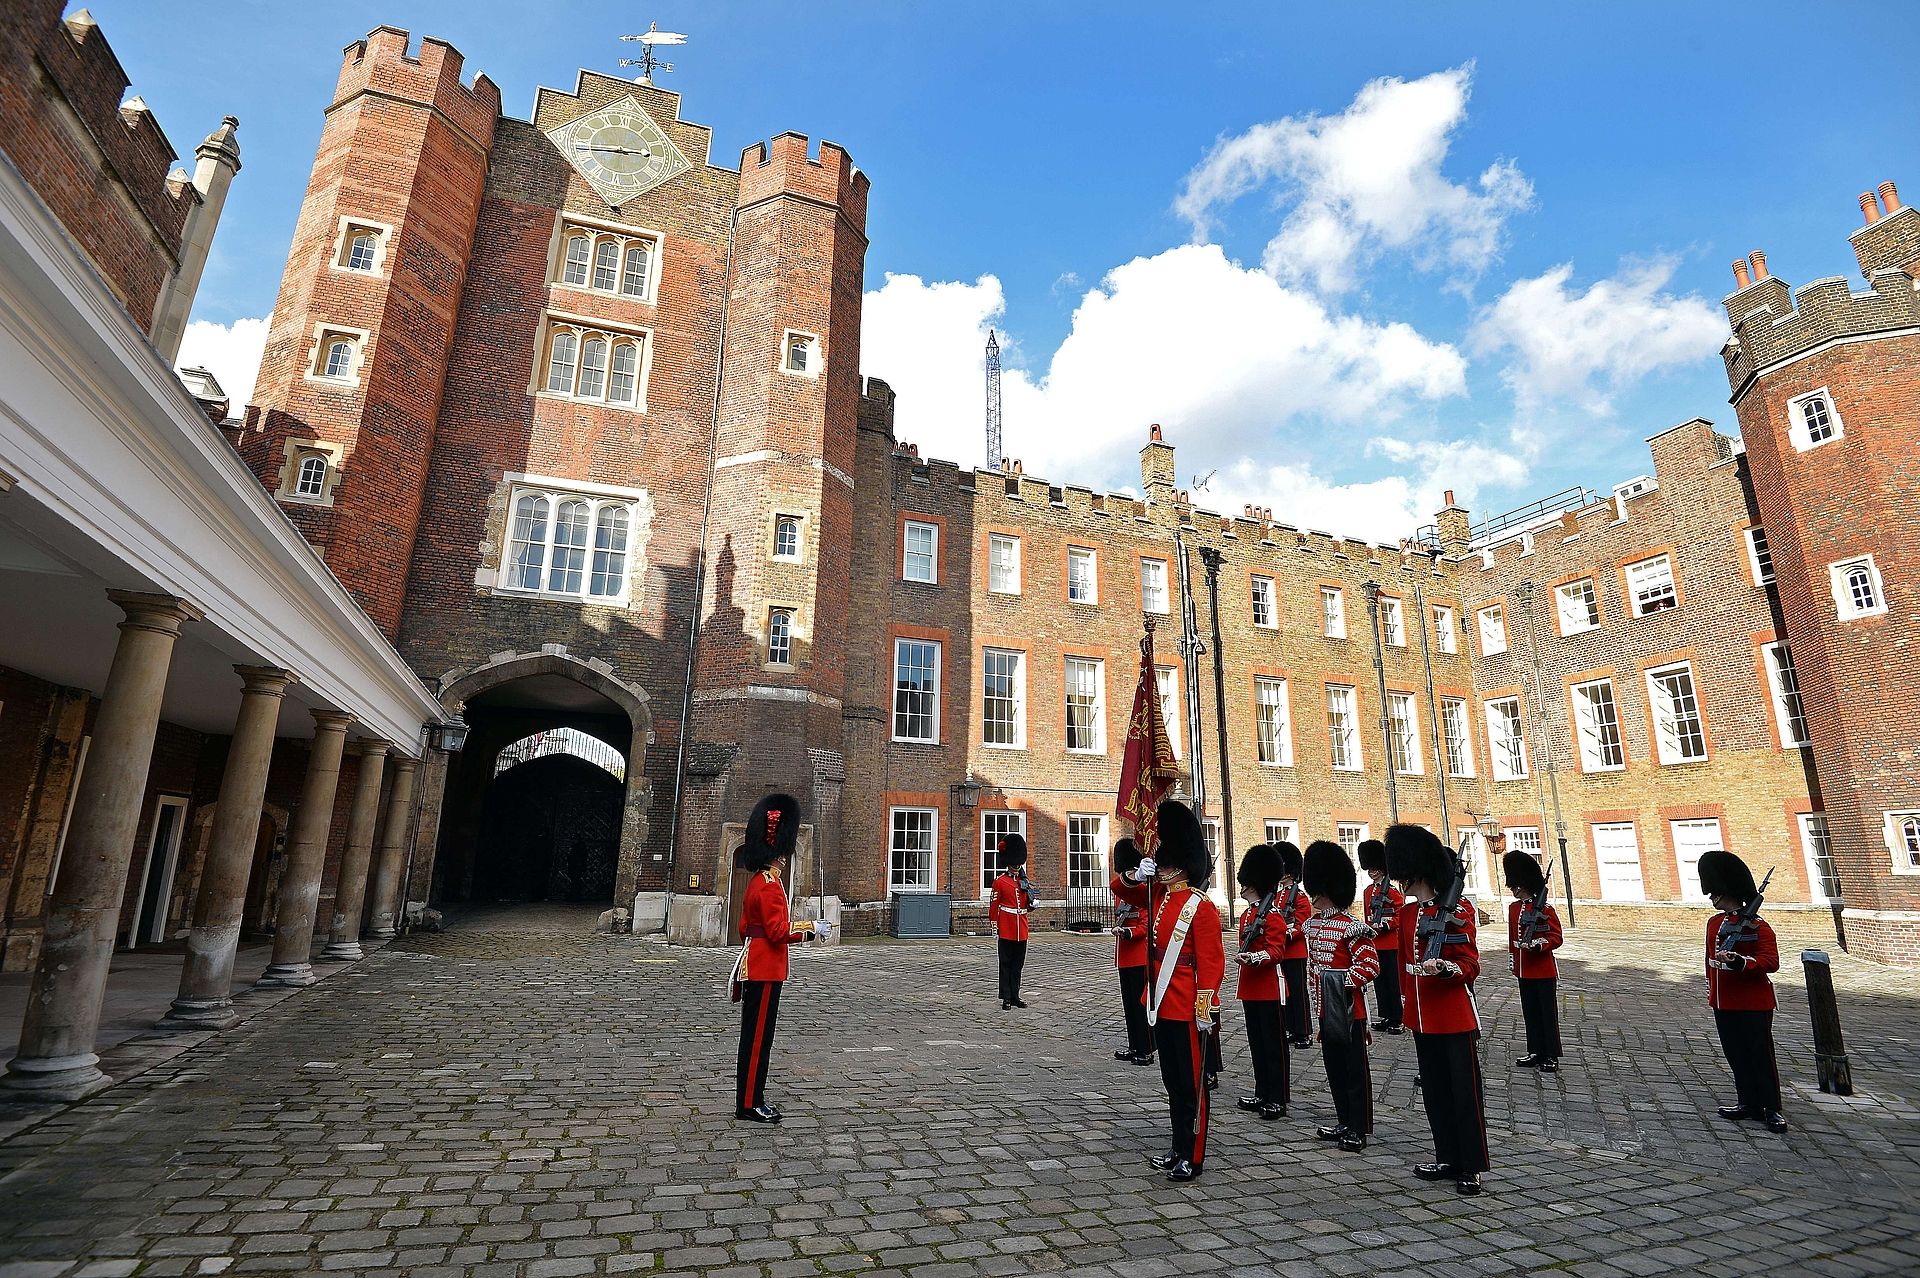 St James' Palace in Londen